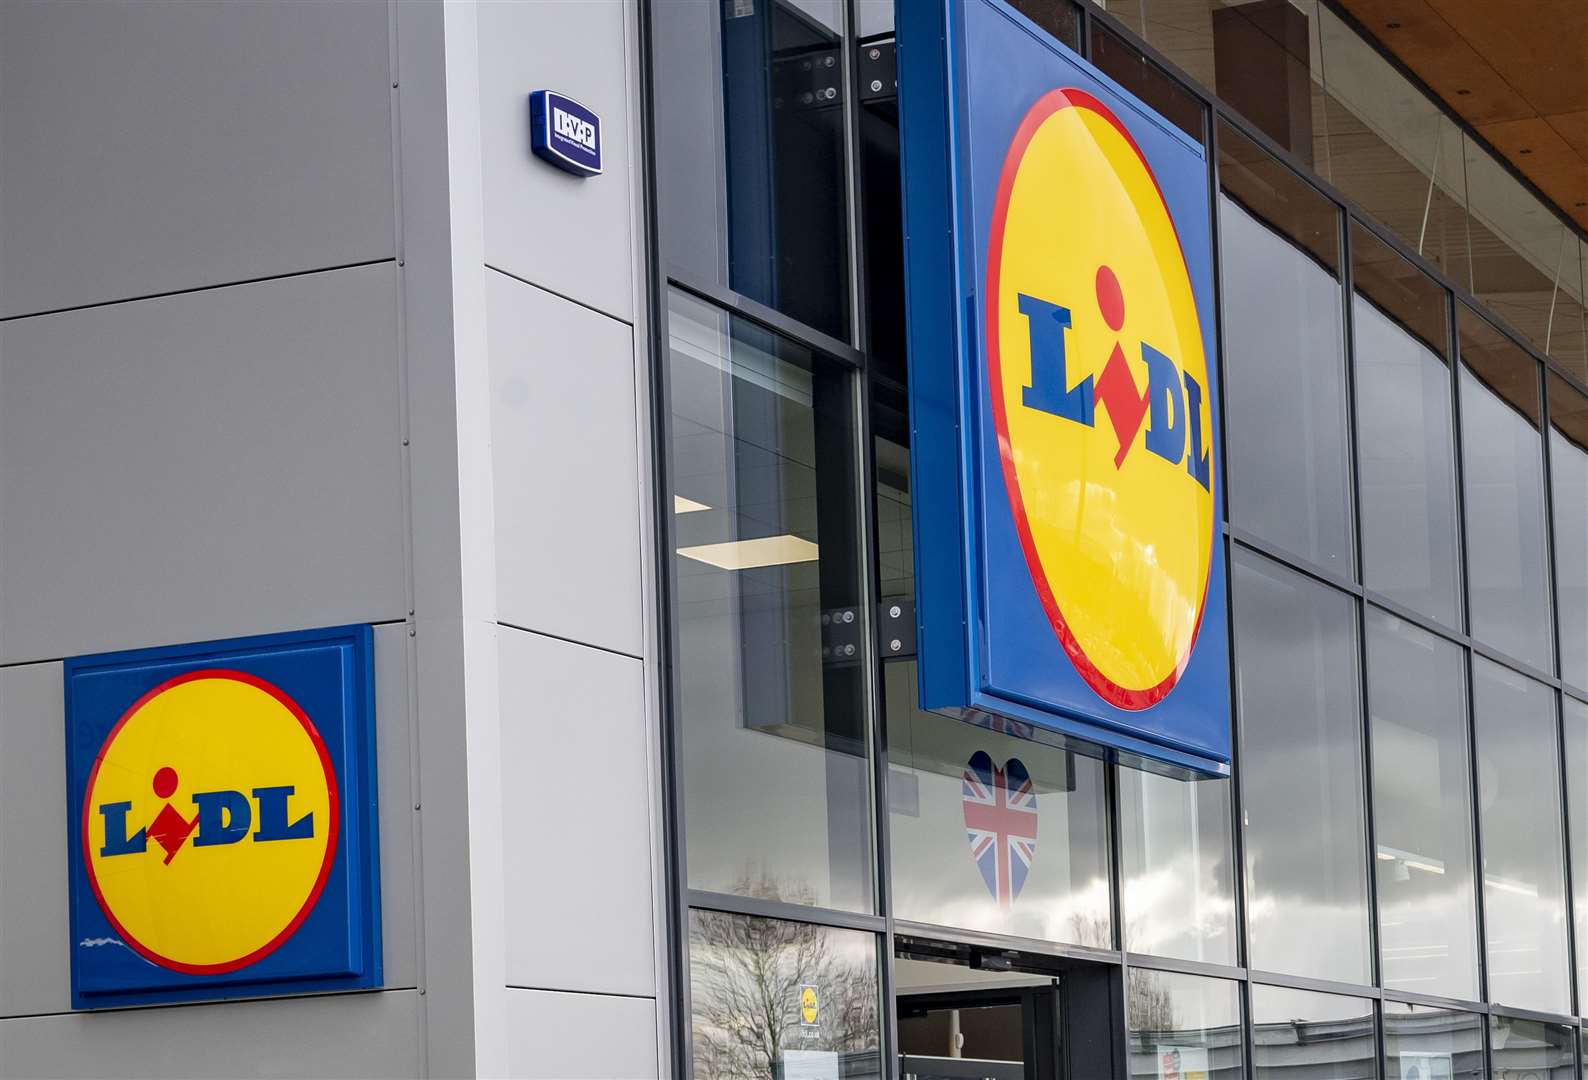 It will be Medway's first Lidl